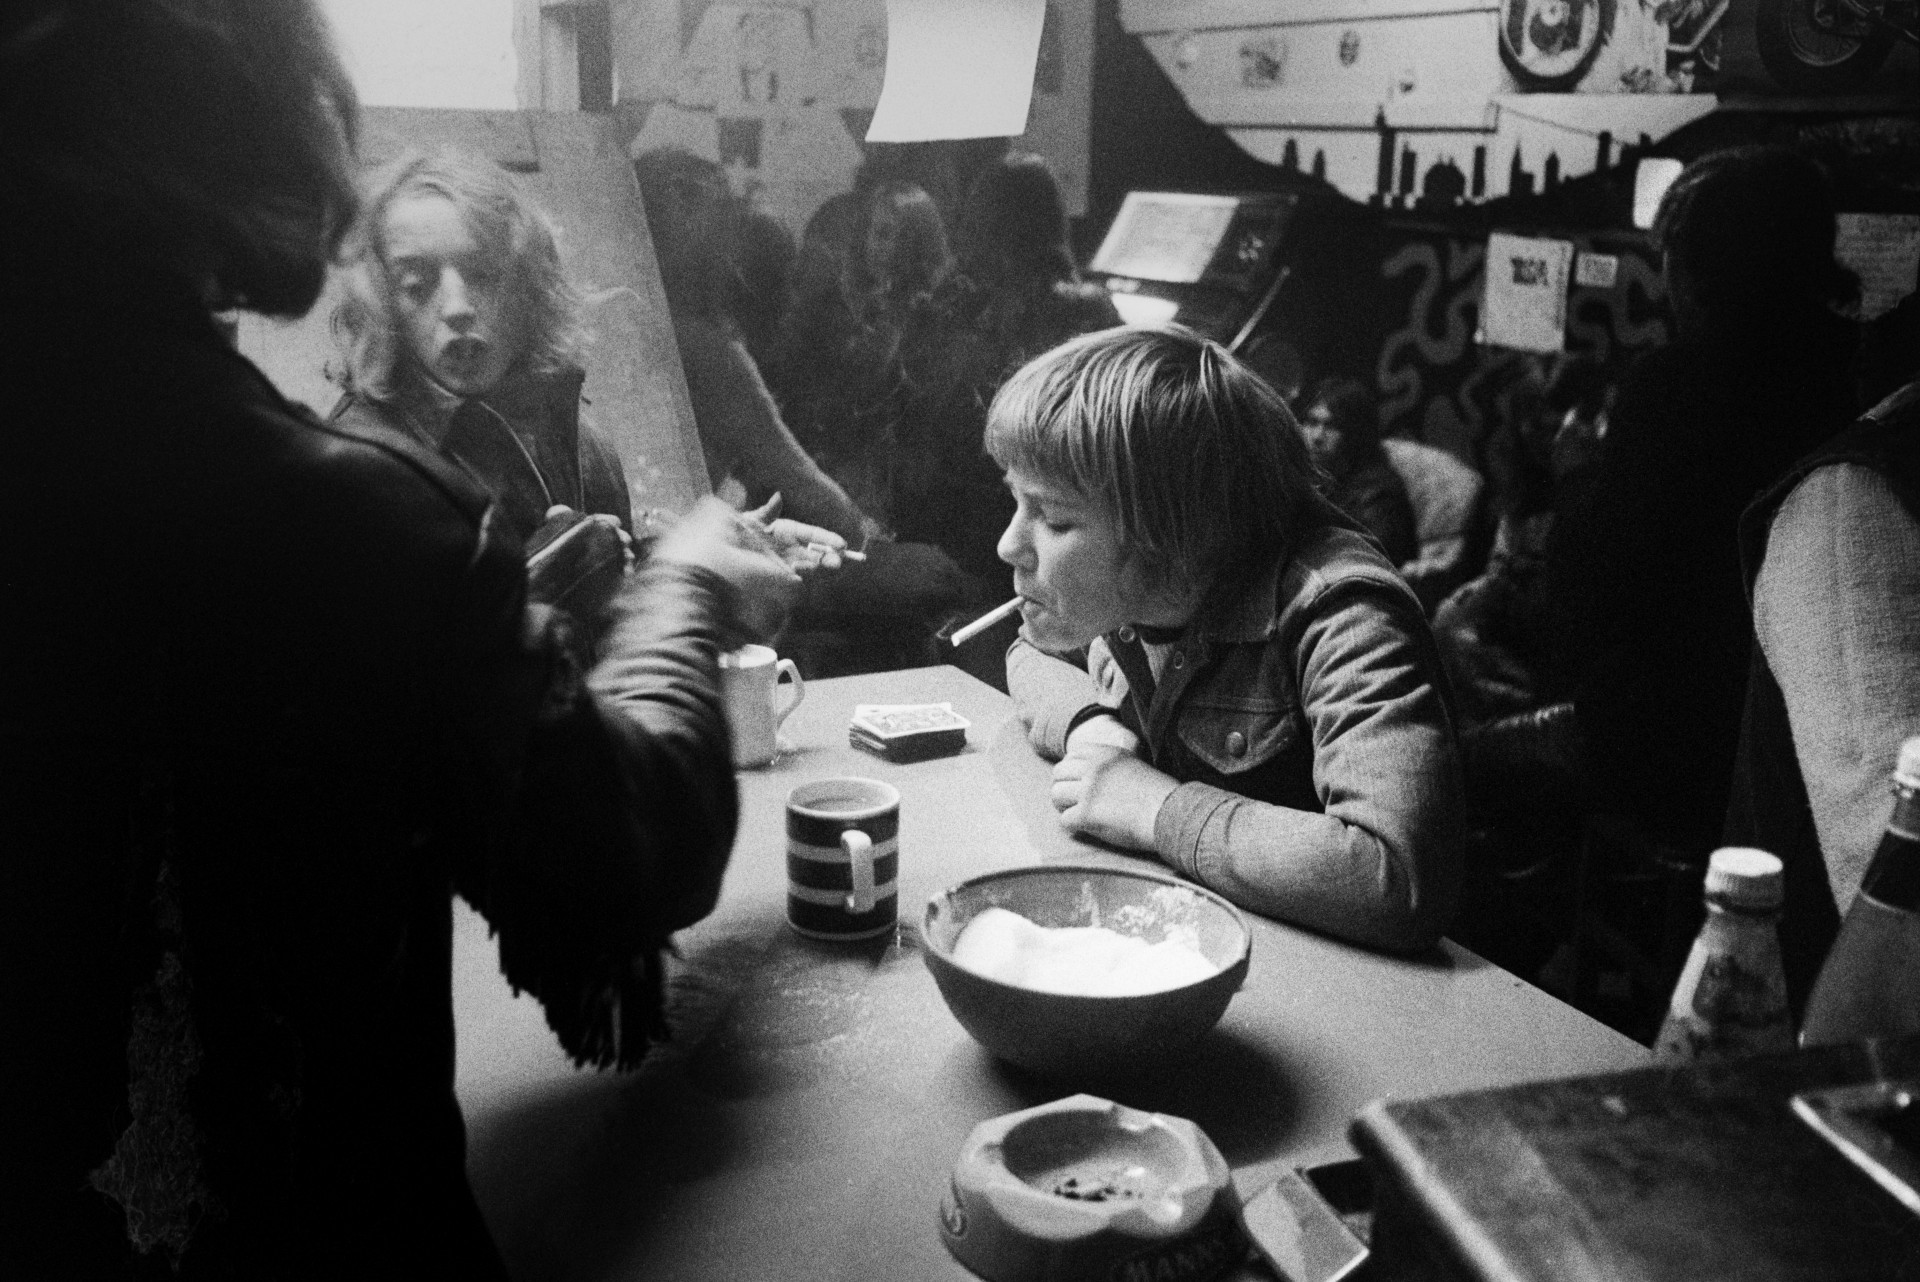 Young men and ta boy playing cards and smoking at a table, possibly in a pub, youth club or café. Mugs and an ashtray are on the table.